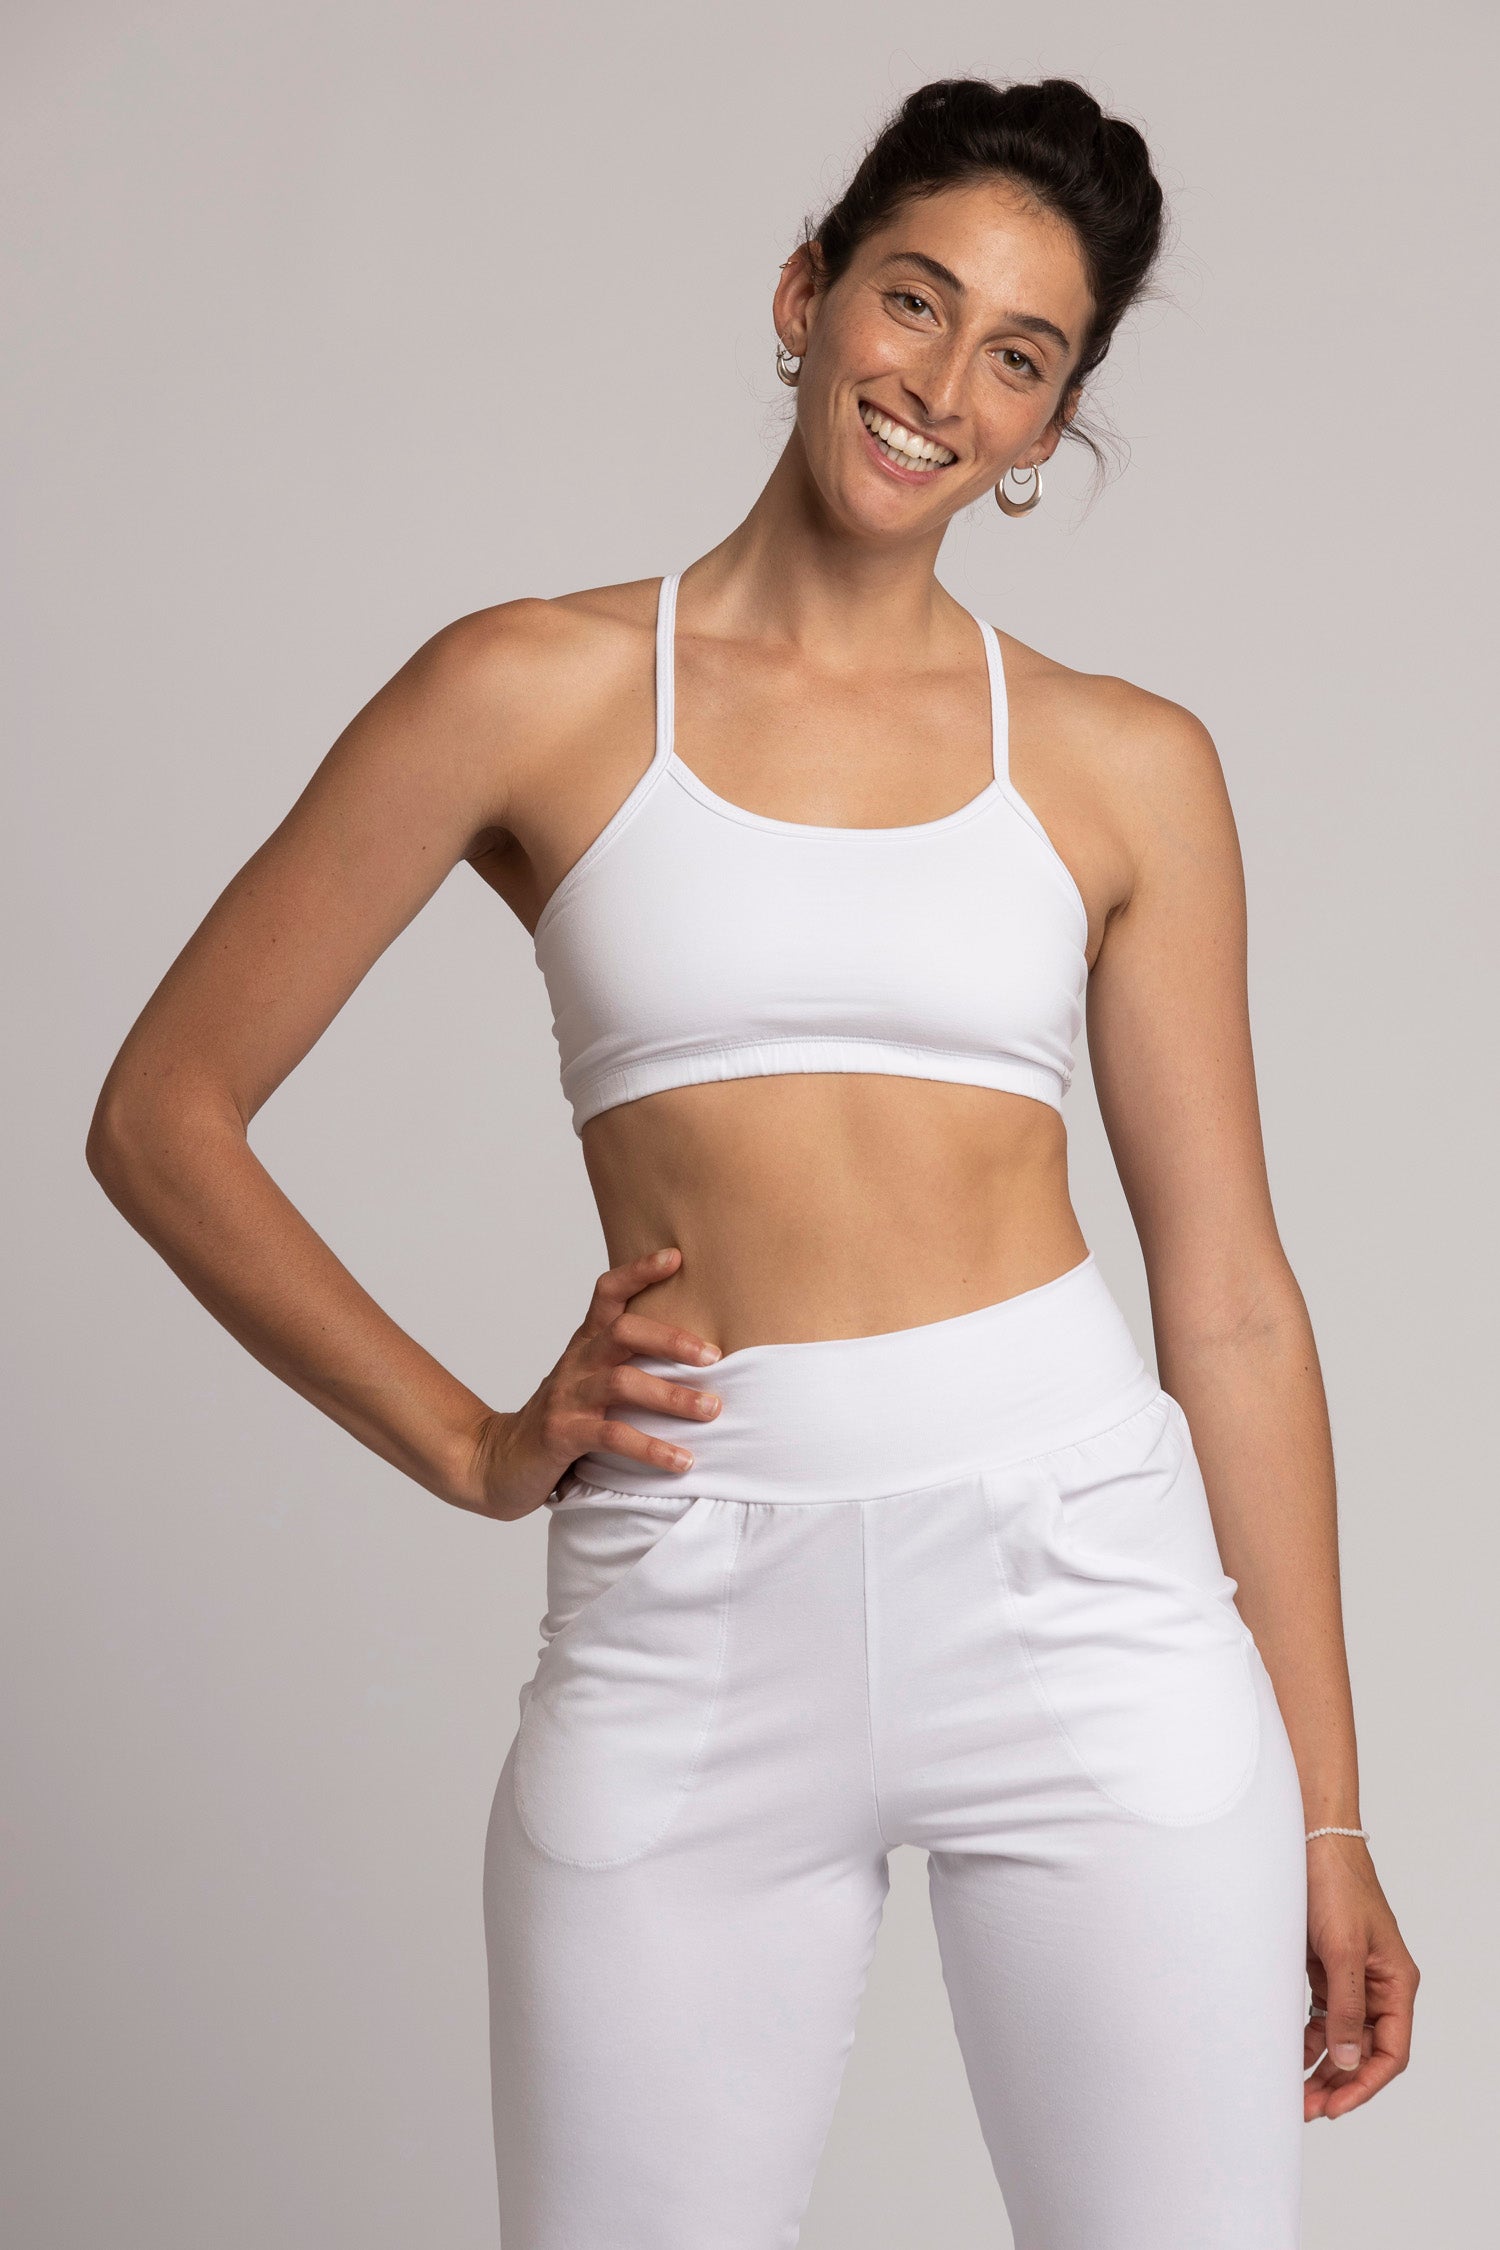 N-Square's White Pure Cotton Bra for Hot and Humid Indian Weather :  : Fashion